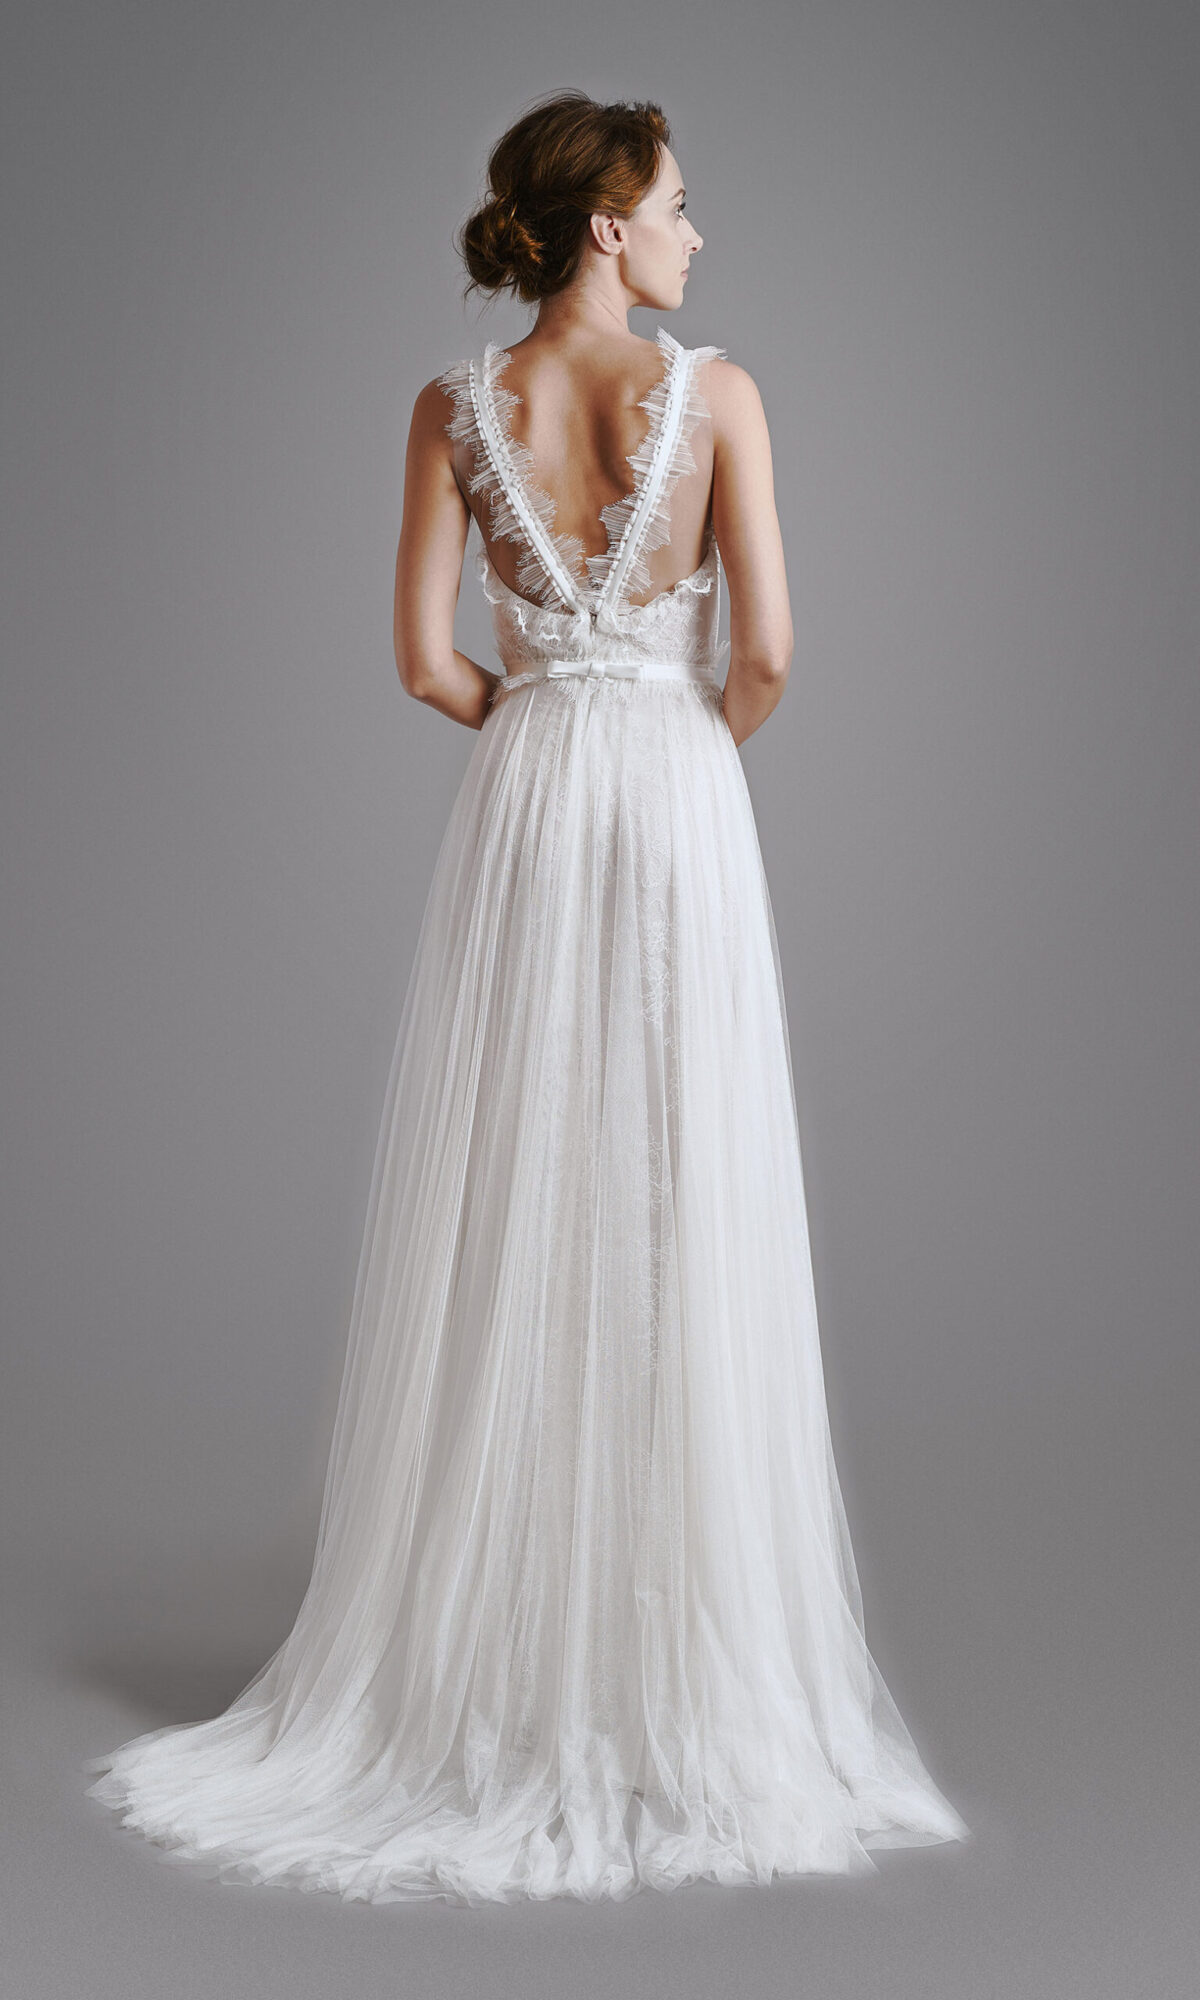 Romantic wedding dress WILLOW BUTERFLY BHARB-WILLOW-BUTTERFLY-BH2020-0005-005-tall